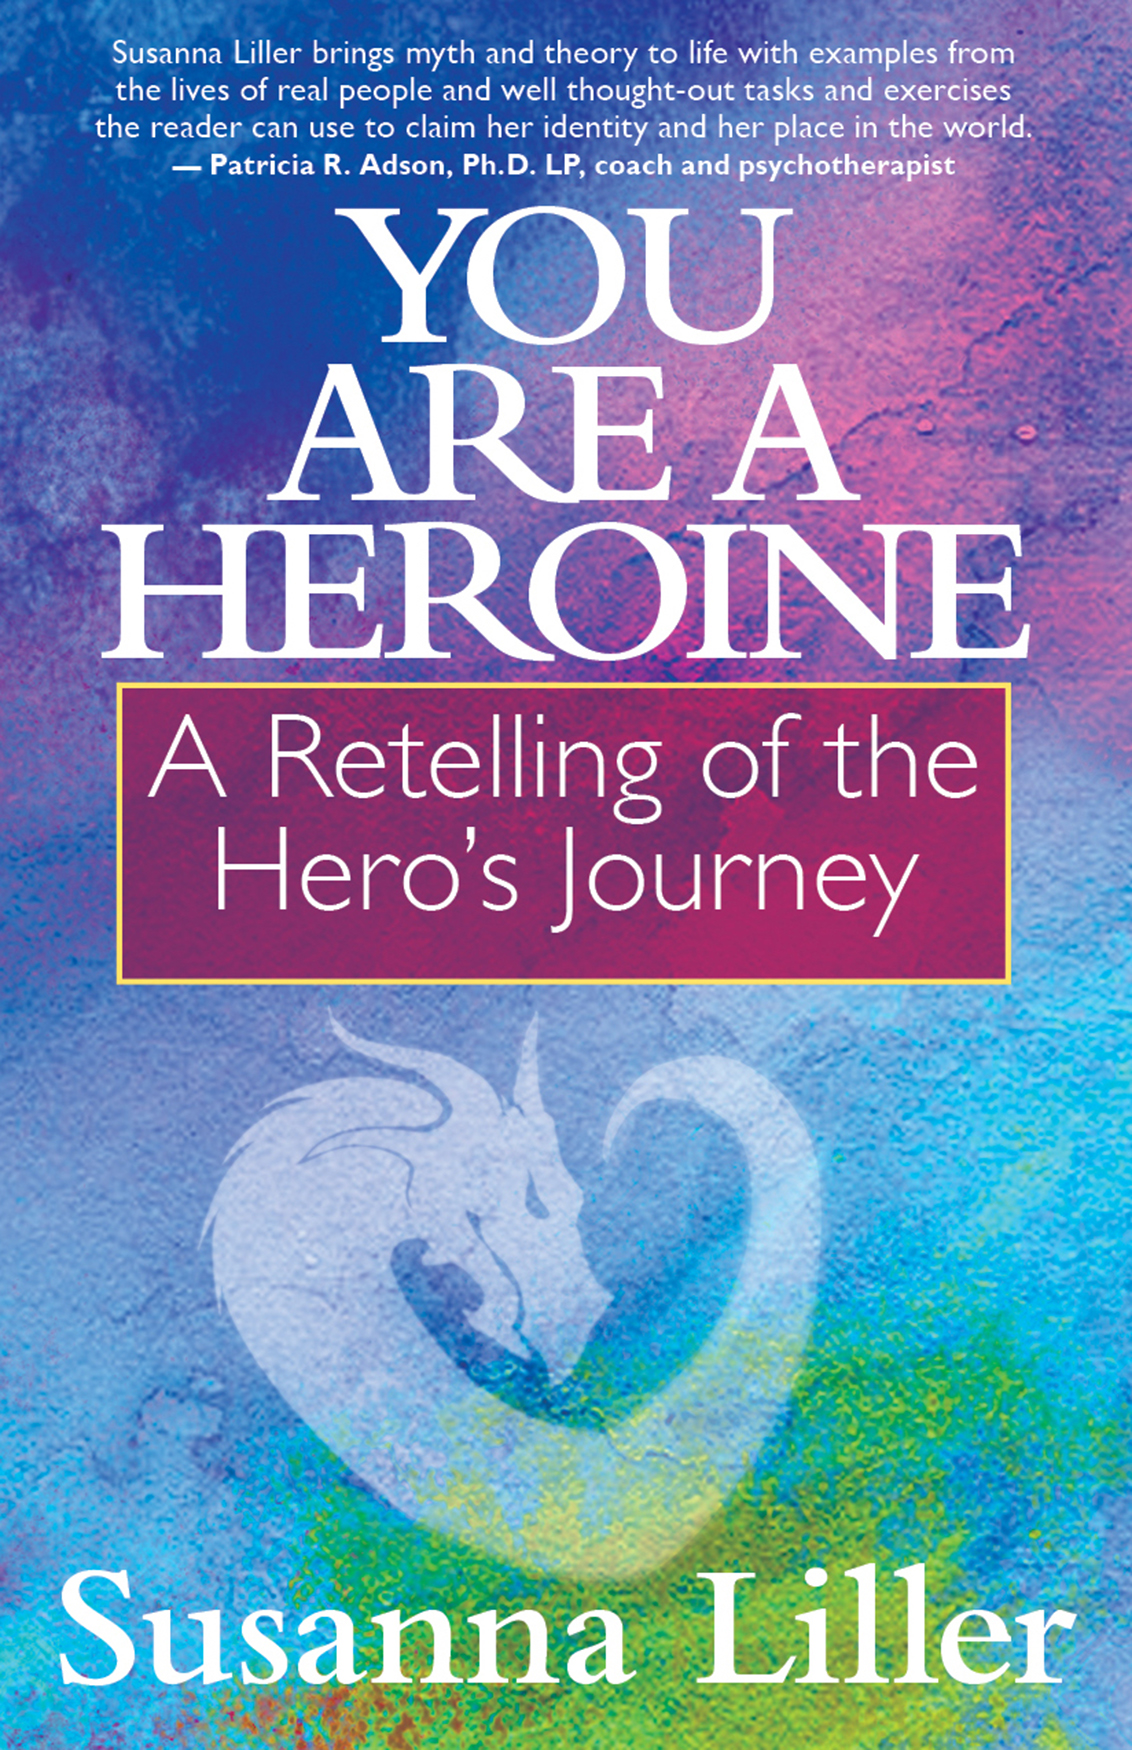 You Are a Heroine A Retelling of the Heros Journey - image 1